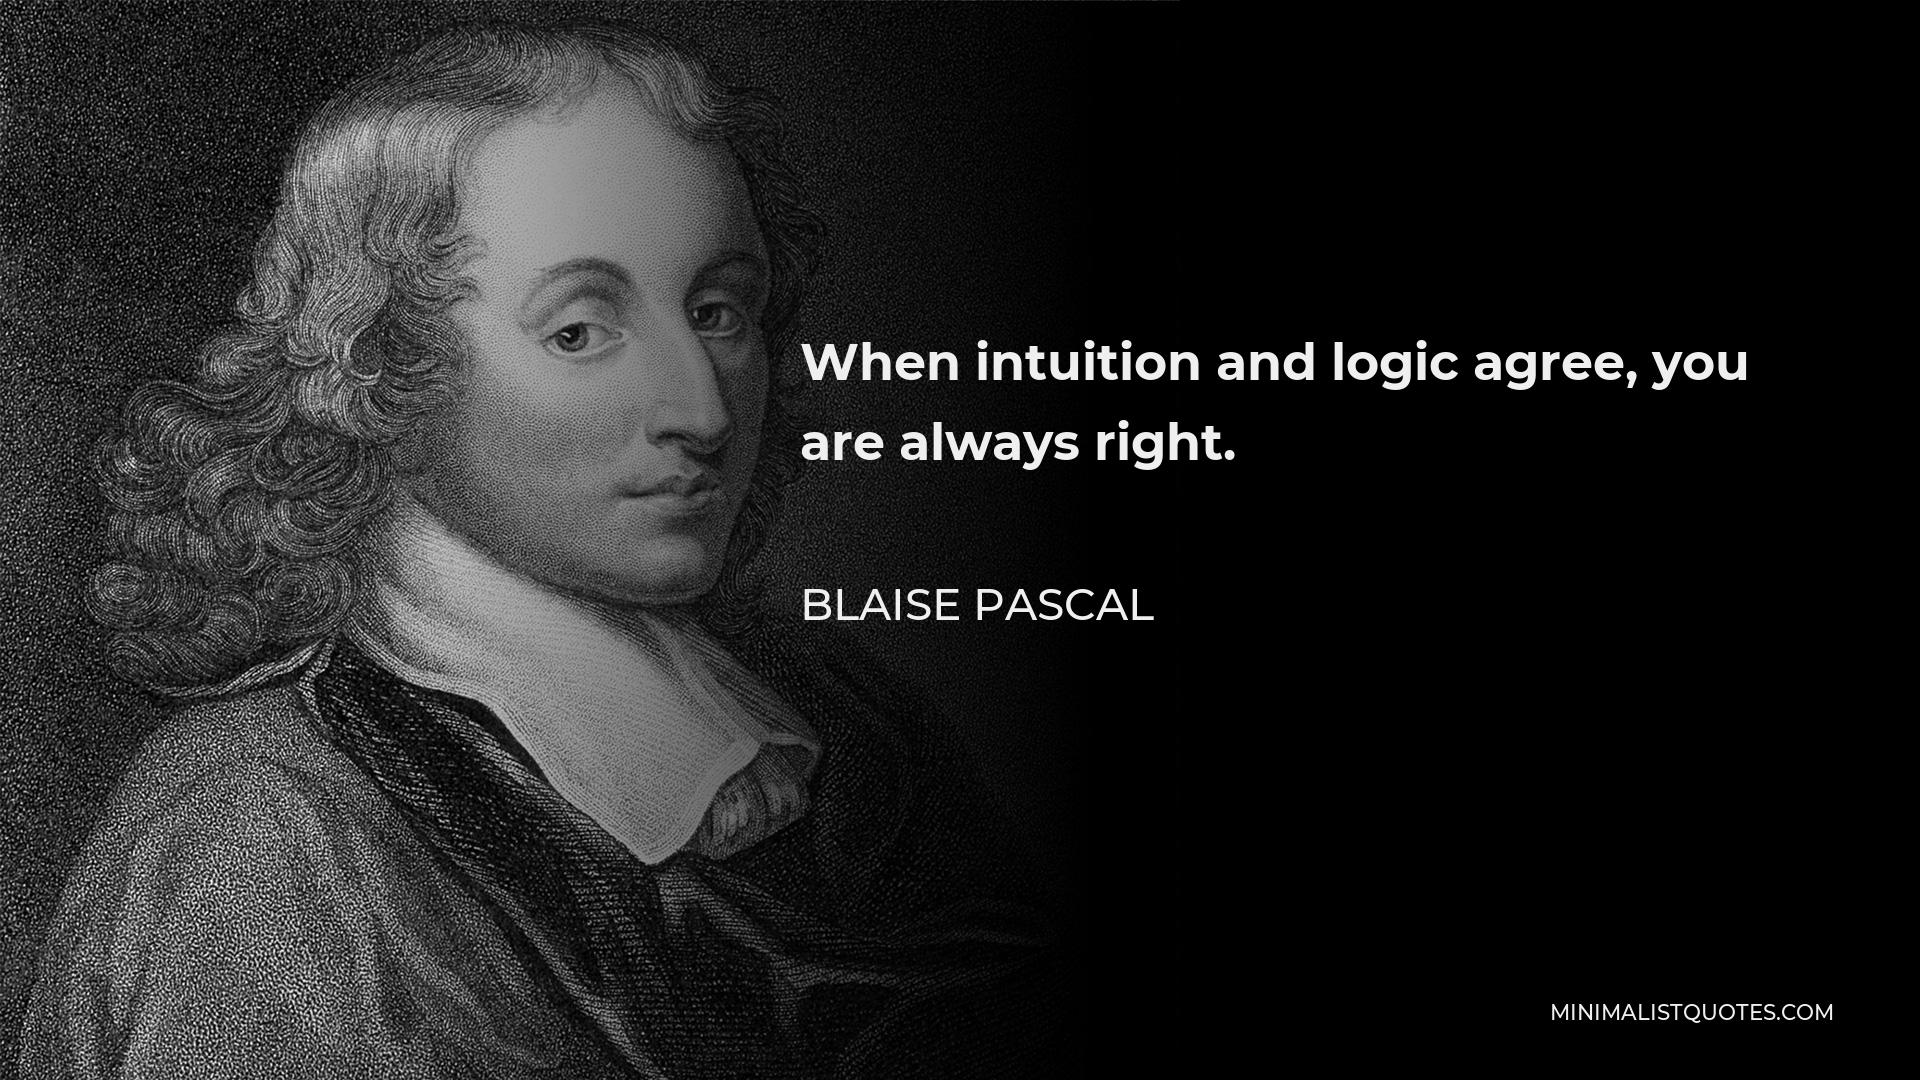 Blaise Pascal Quote - When intuition and logic agree, you are always right.